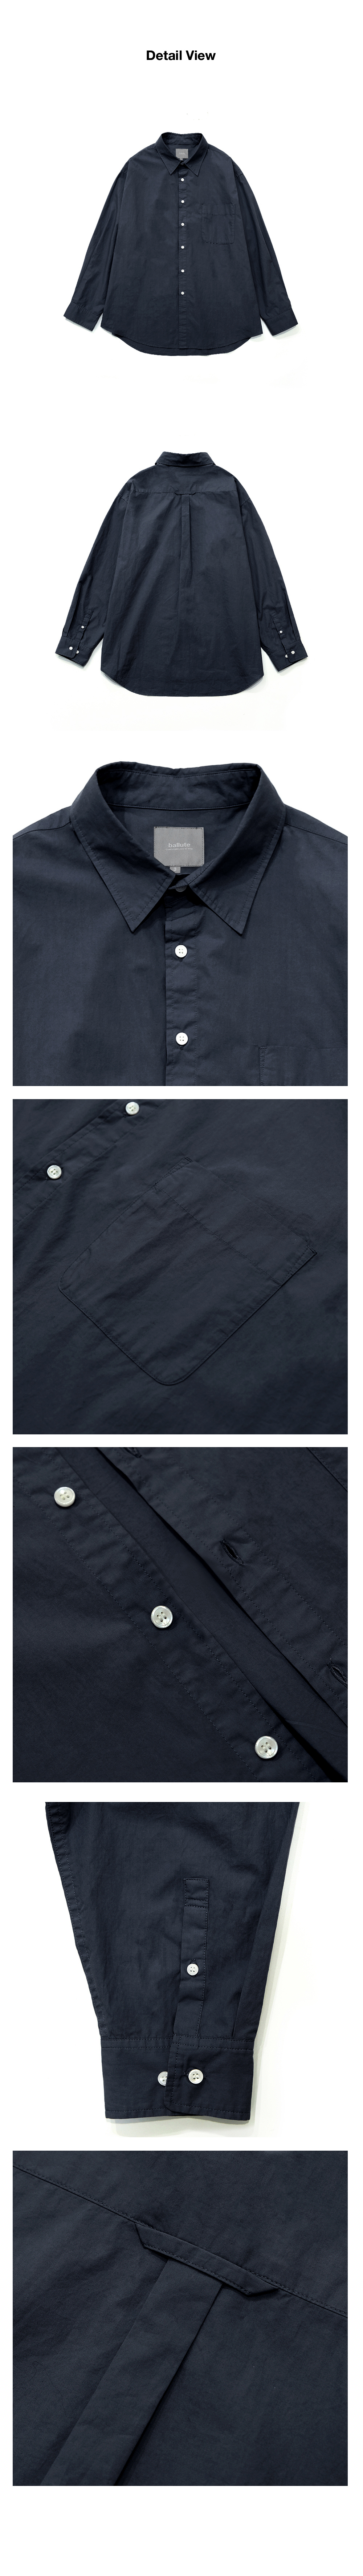 ALL-WEATHER-OVER-SILHOUETTE-SHIRTS-(NIGHT-NAVY)_05.jpg